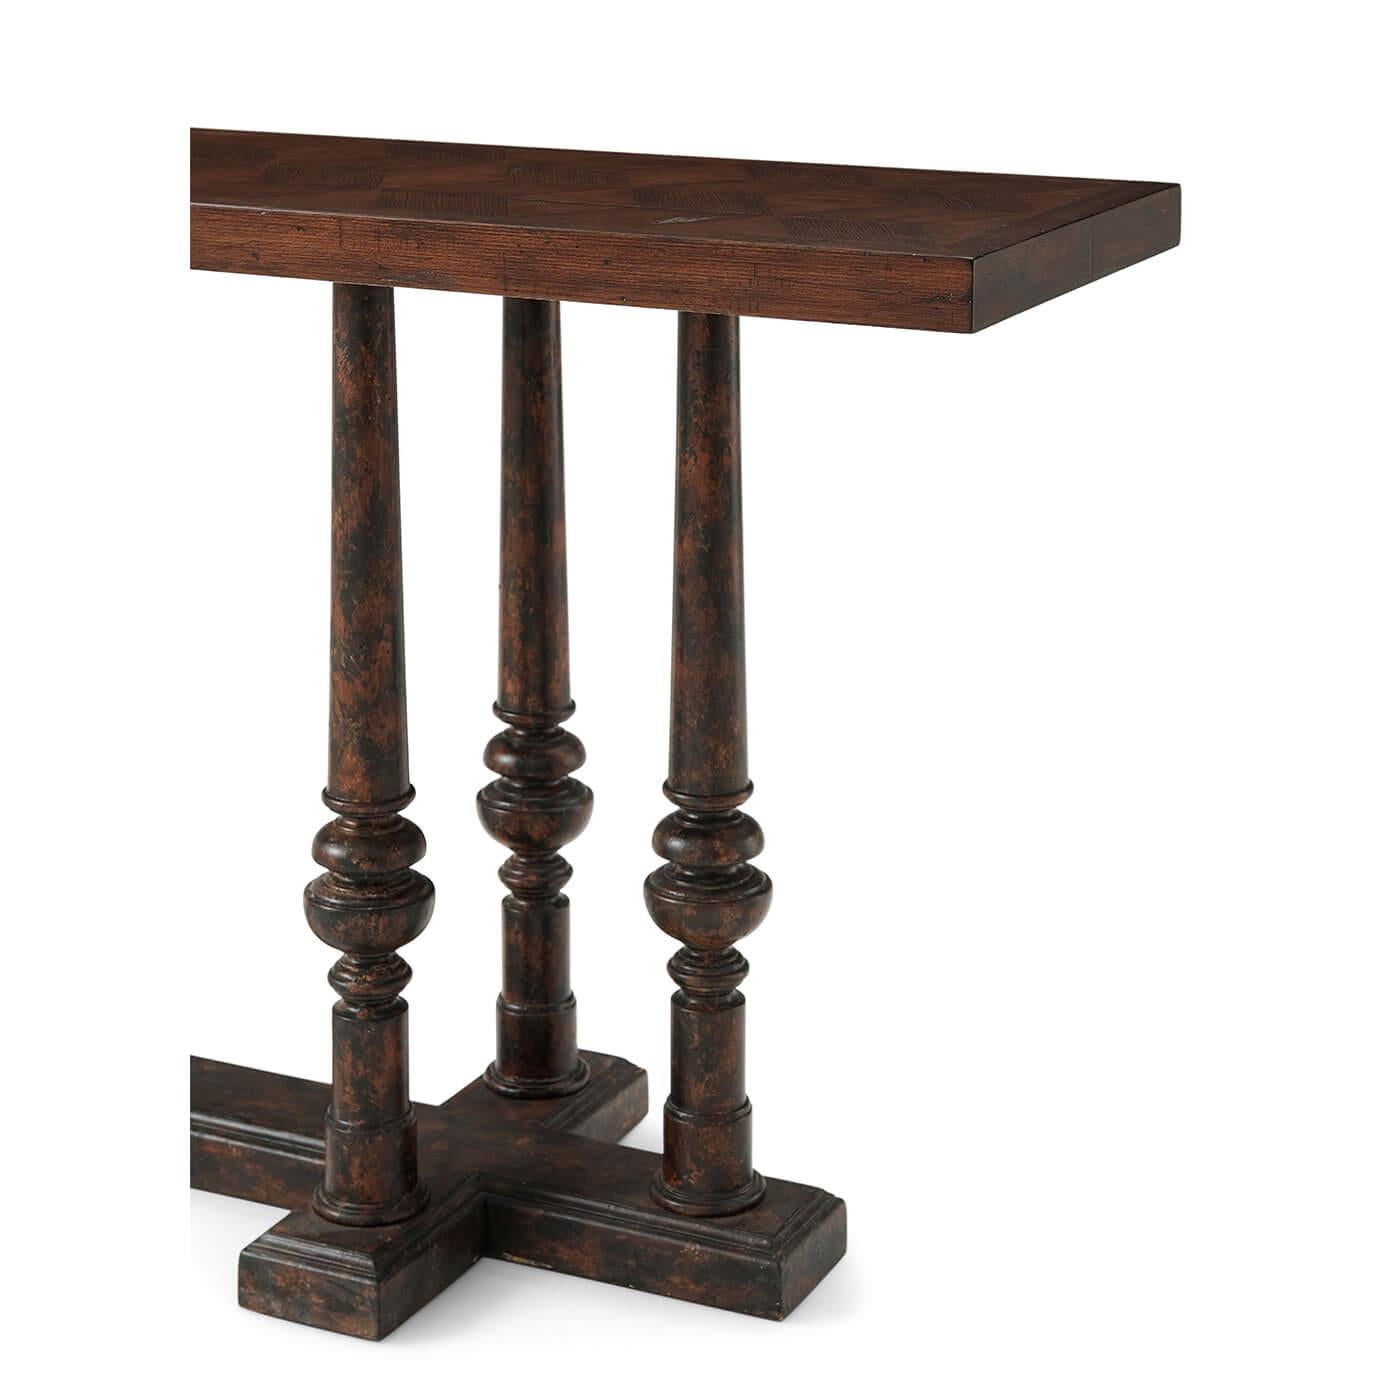 Contemporary Rustic Parquetry Console Table